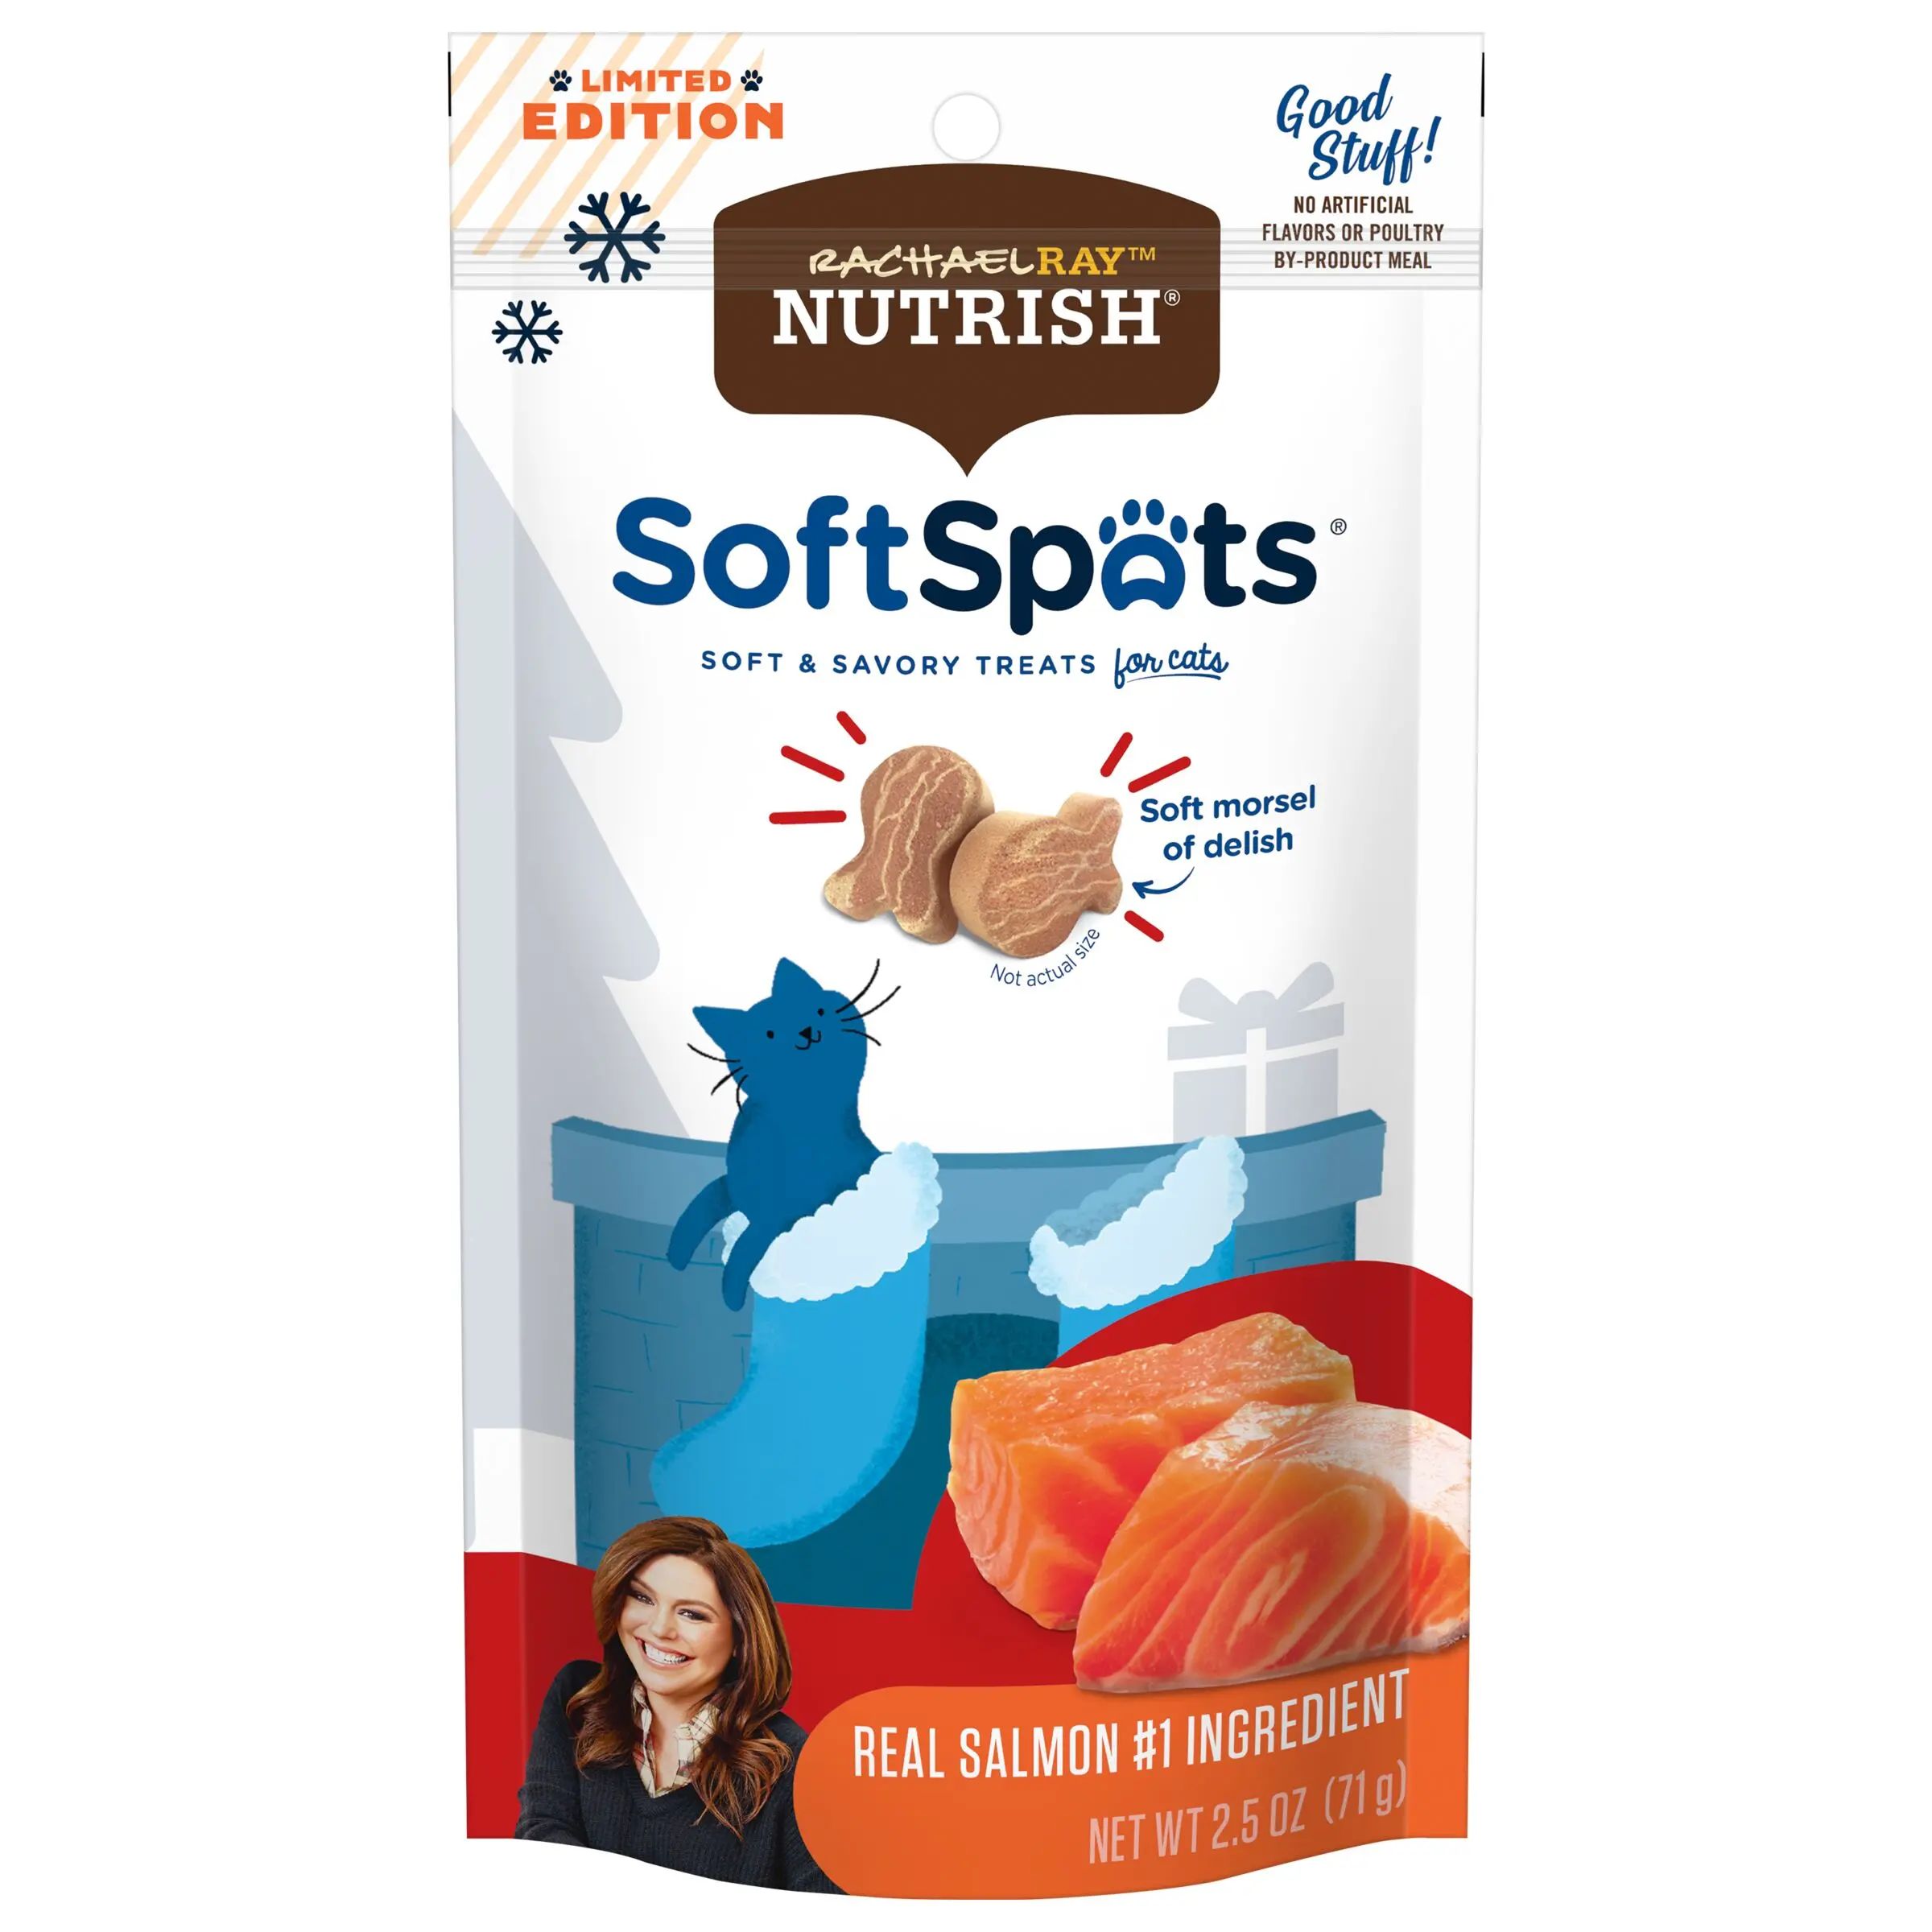 Rachael Ray Nutrish Soft Spots, Salmon, with holiday packaging